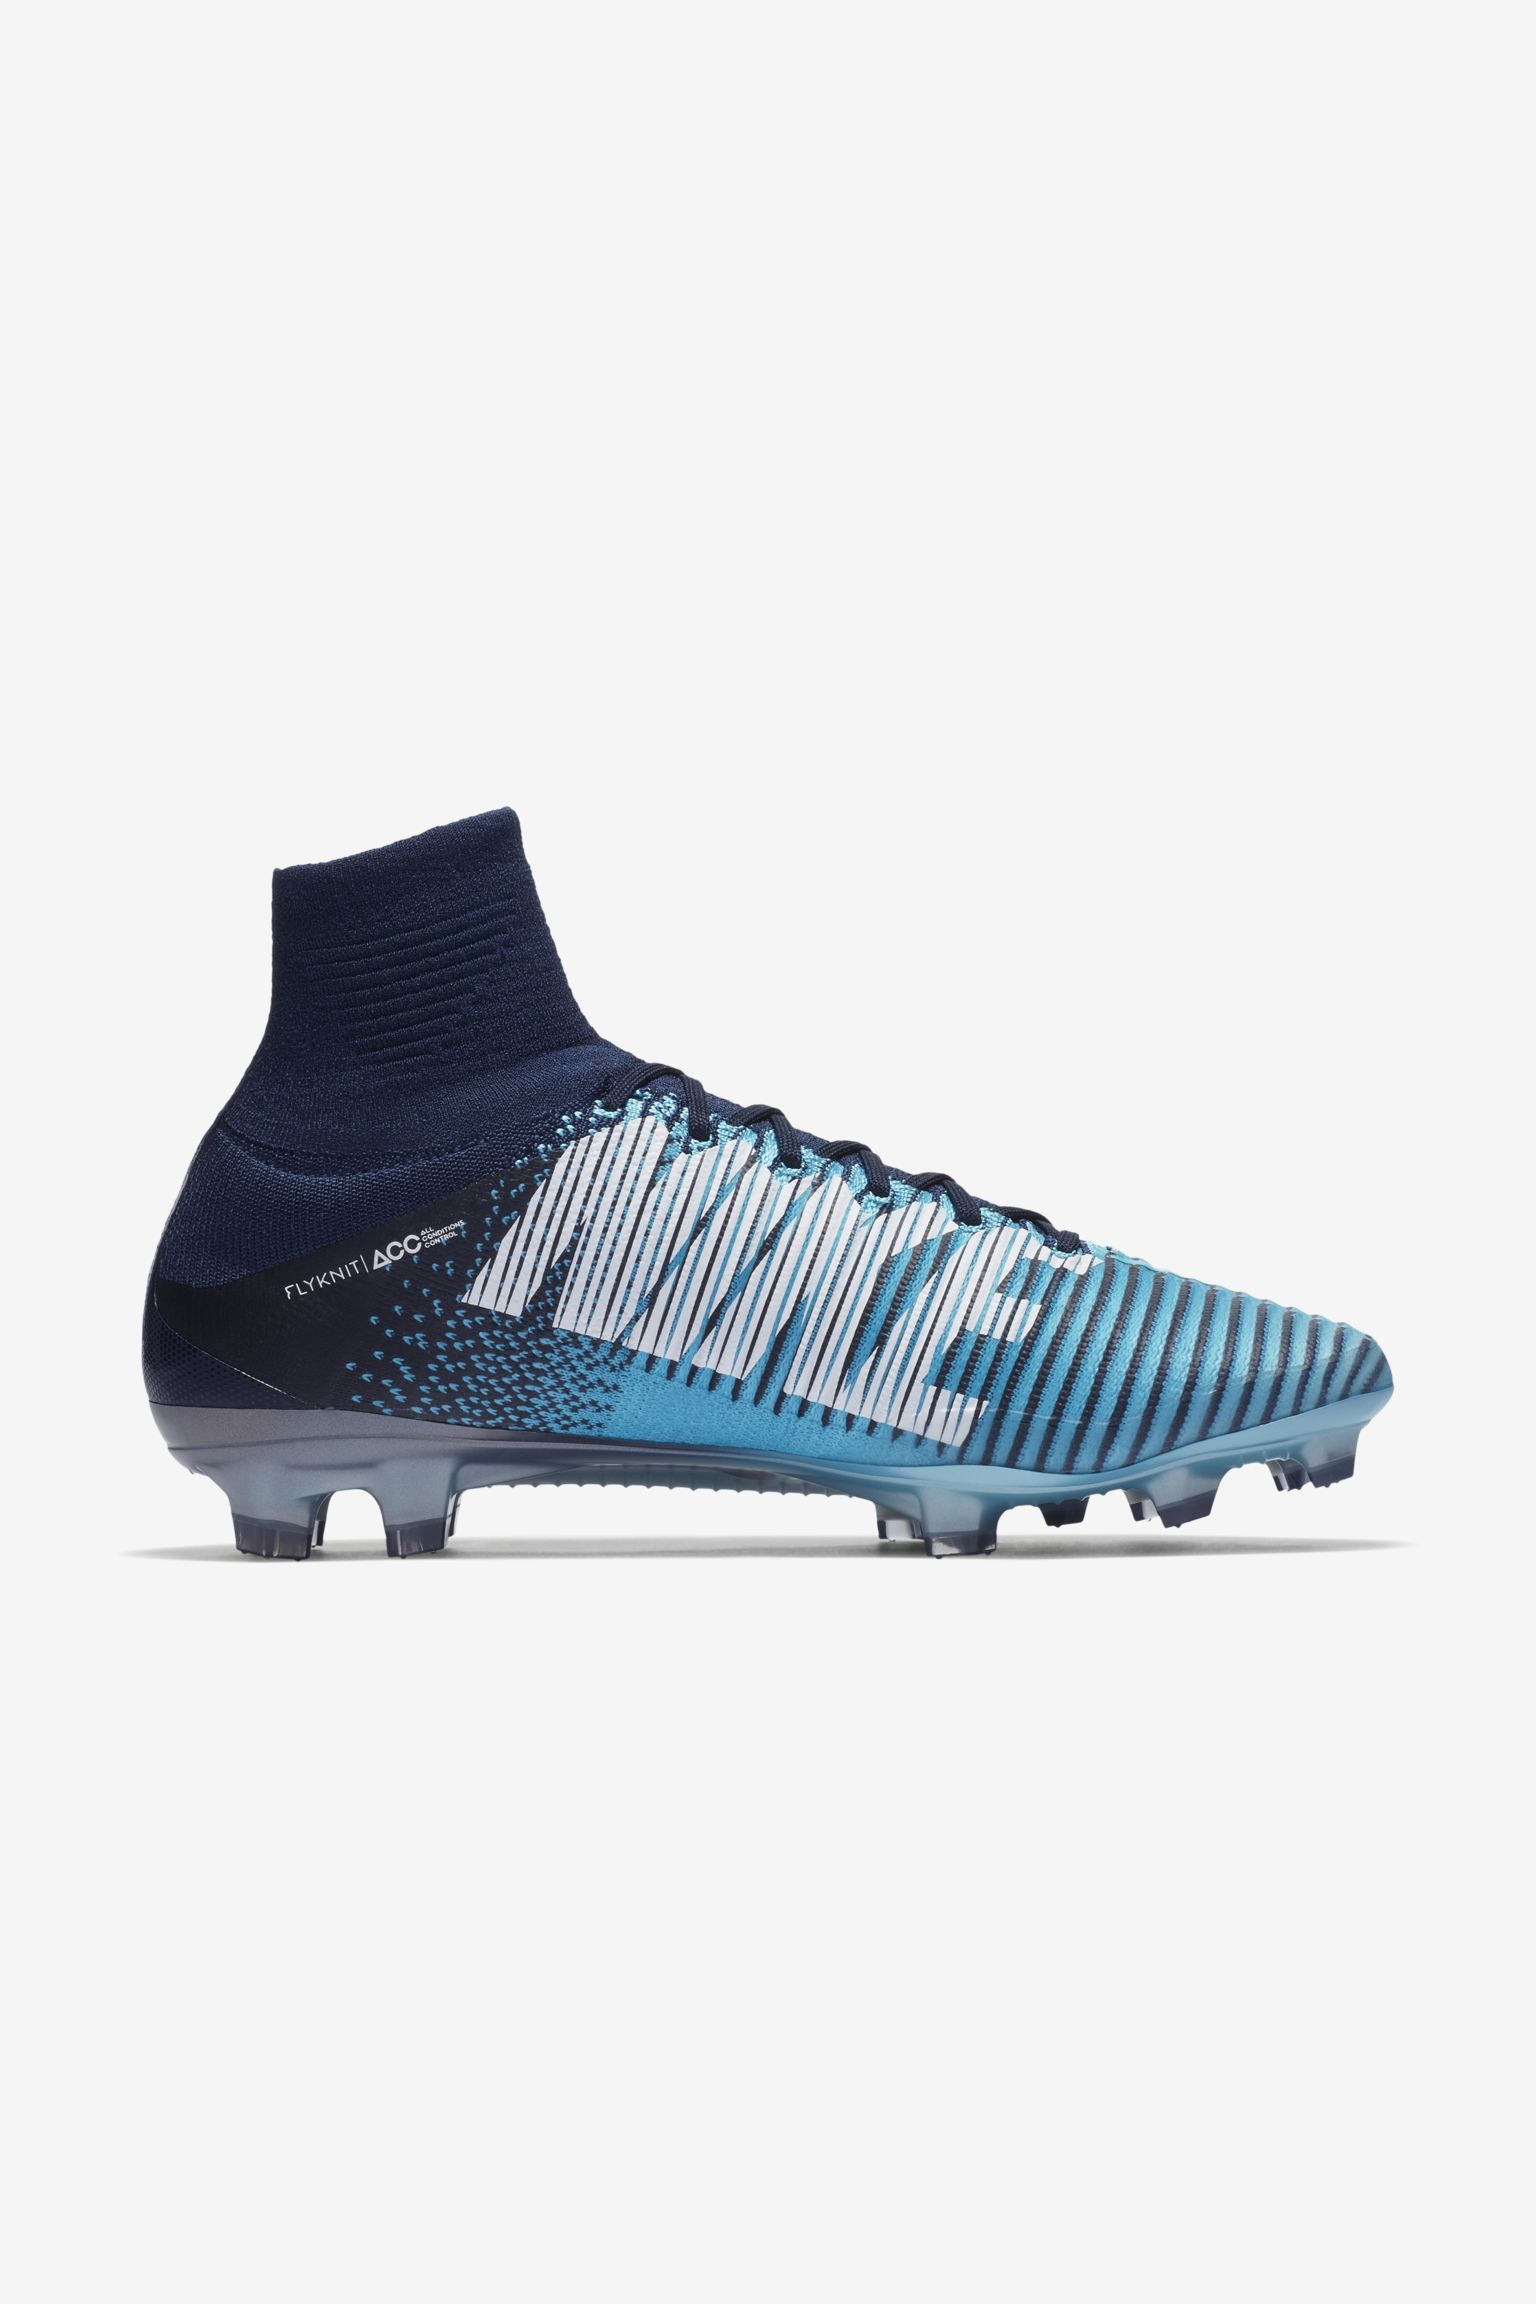 mercurial superfly ice